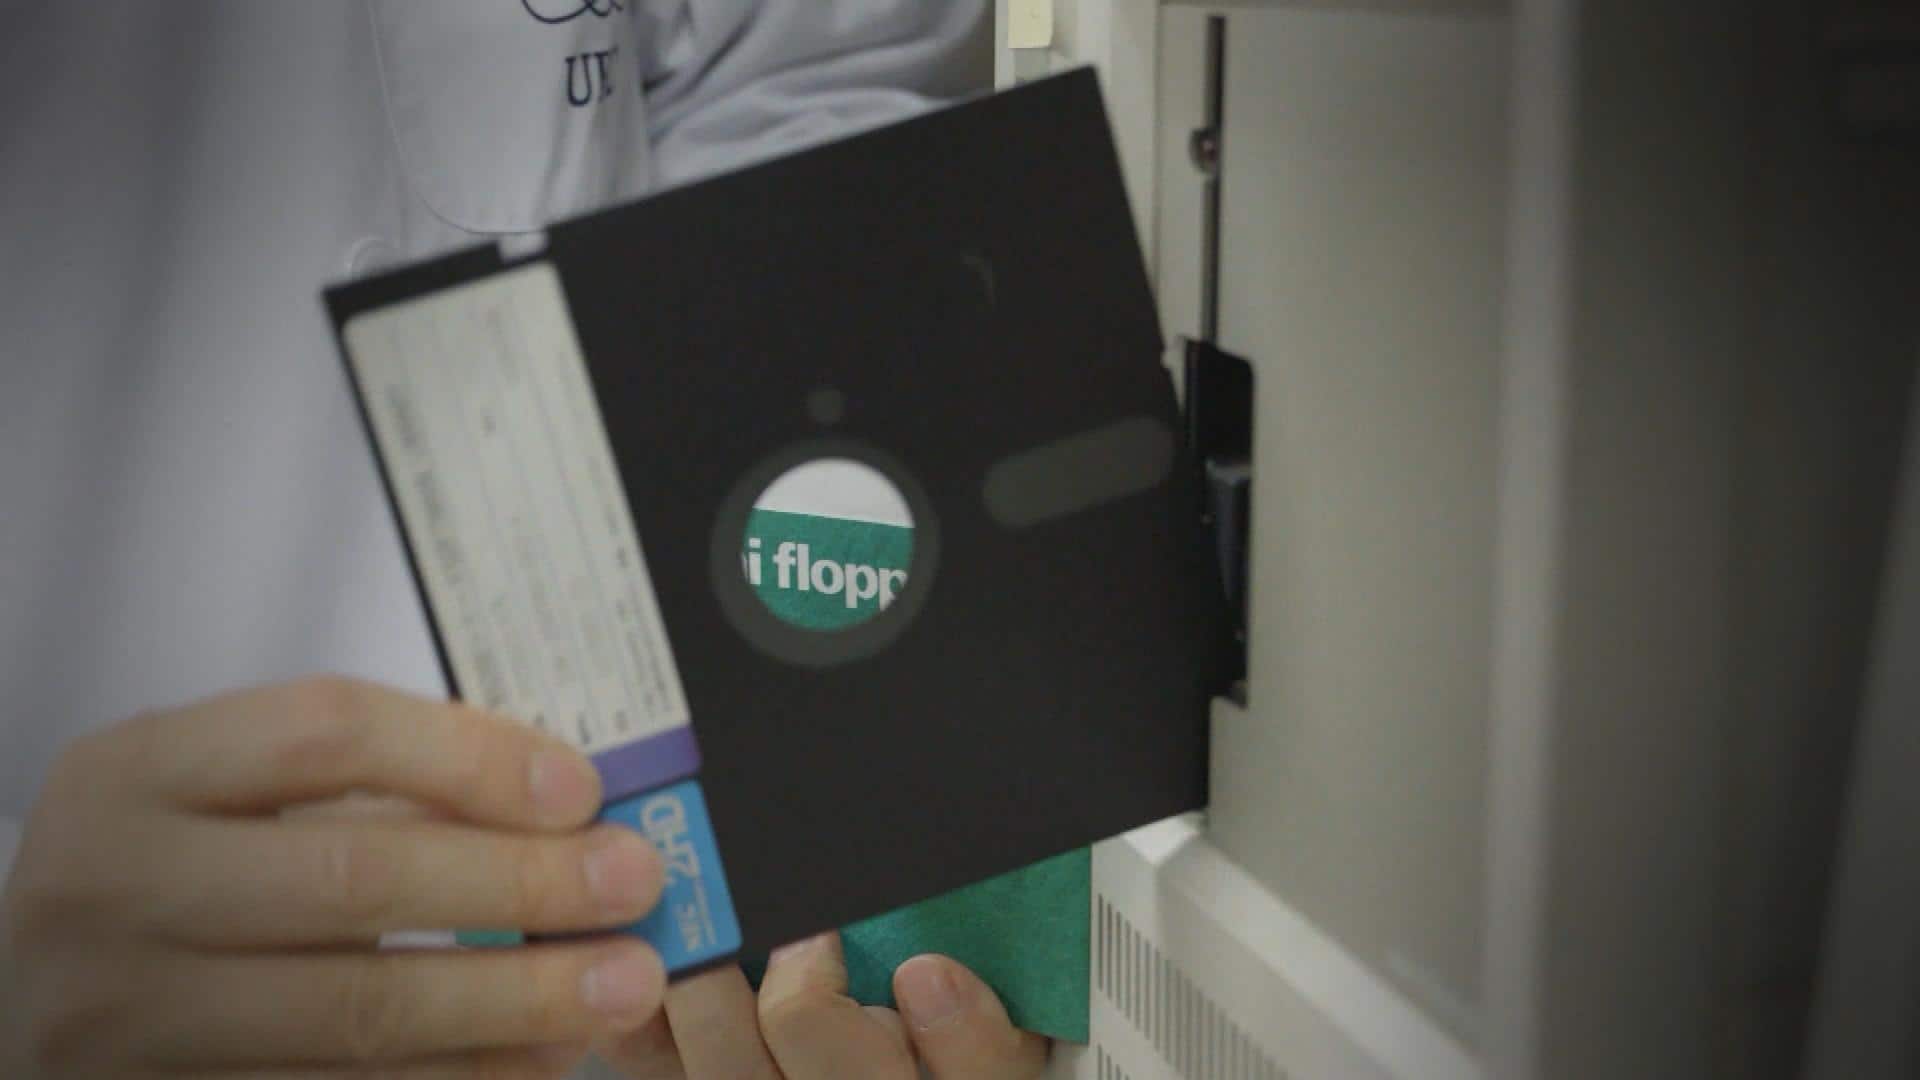 Japanese government phasing out floppy disks, but some users aren’t ready to say goodbye